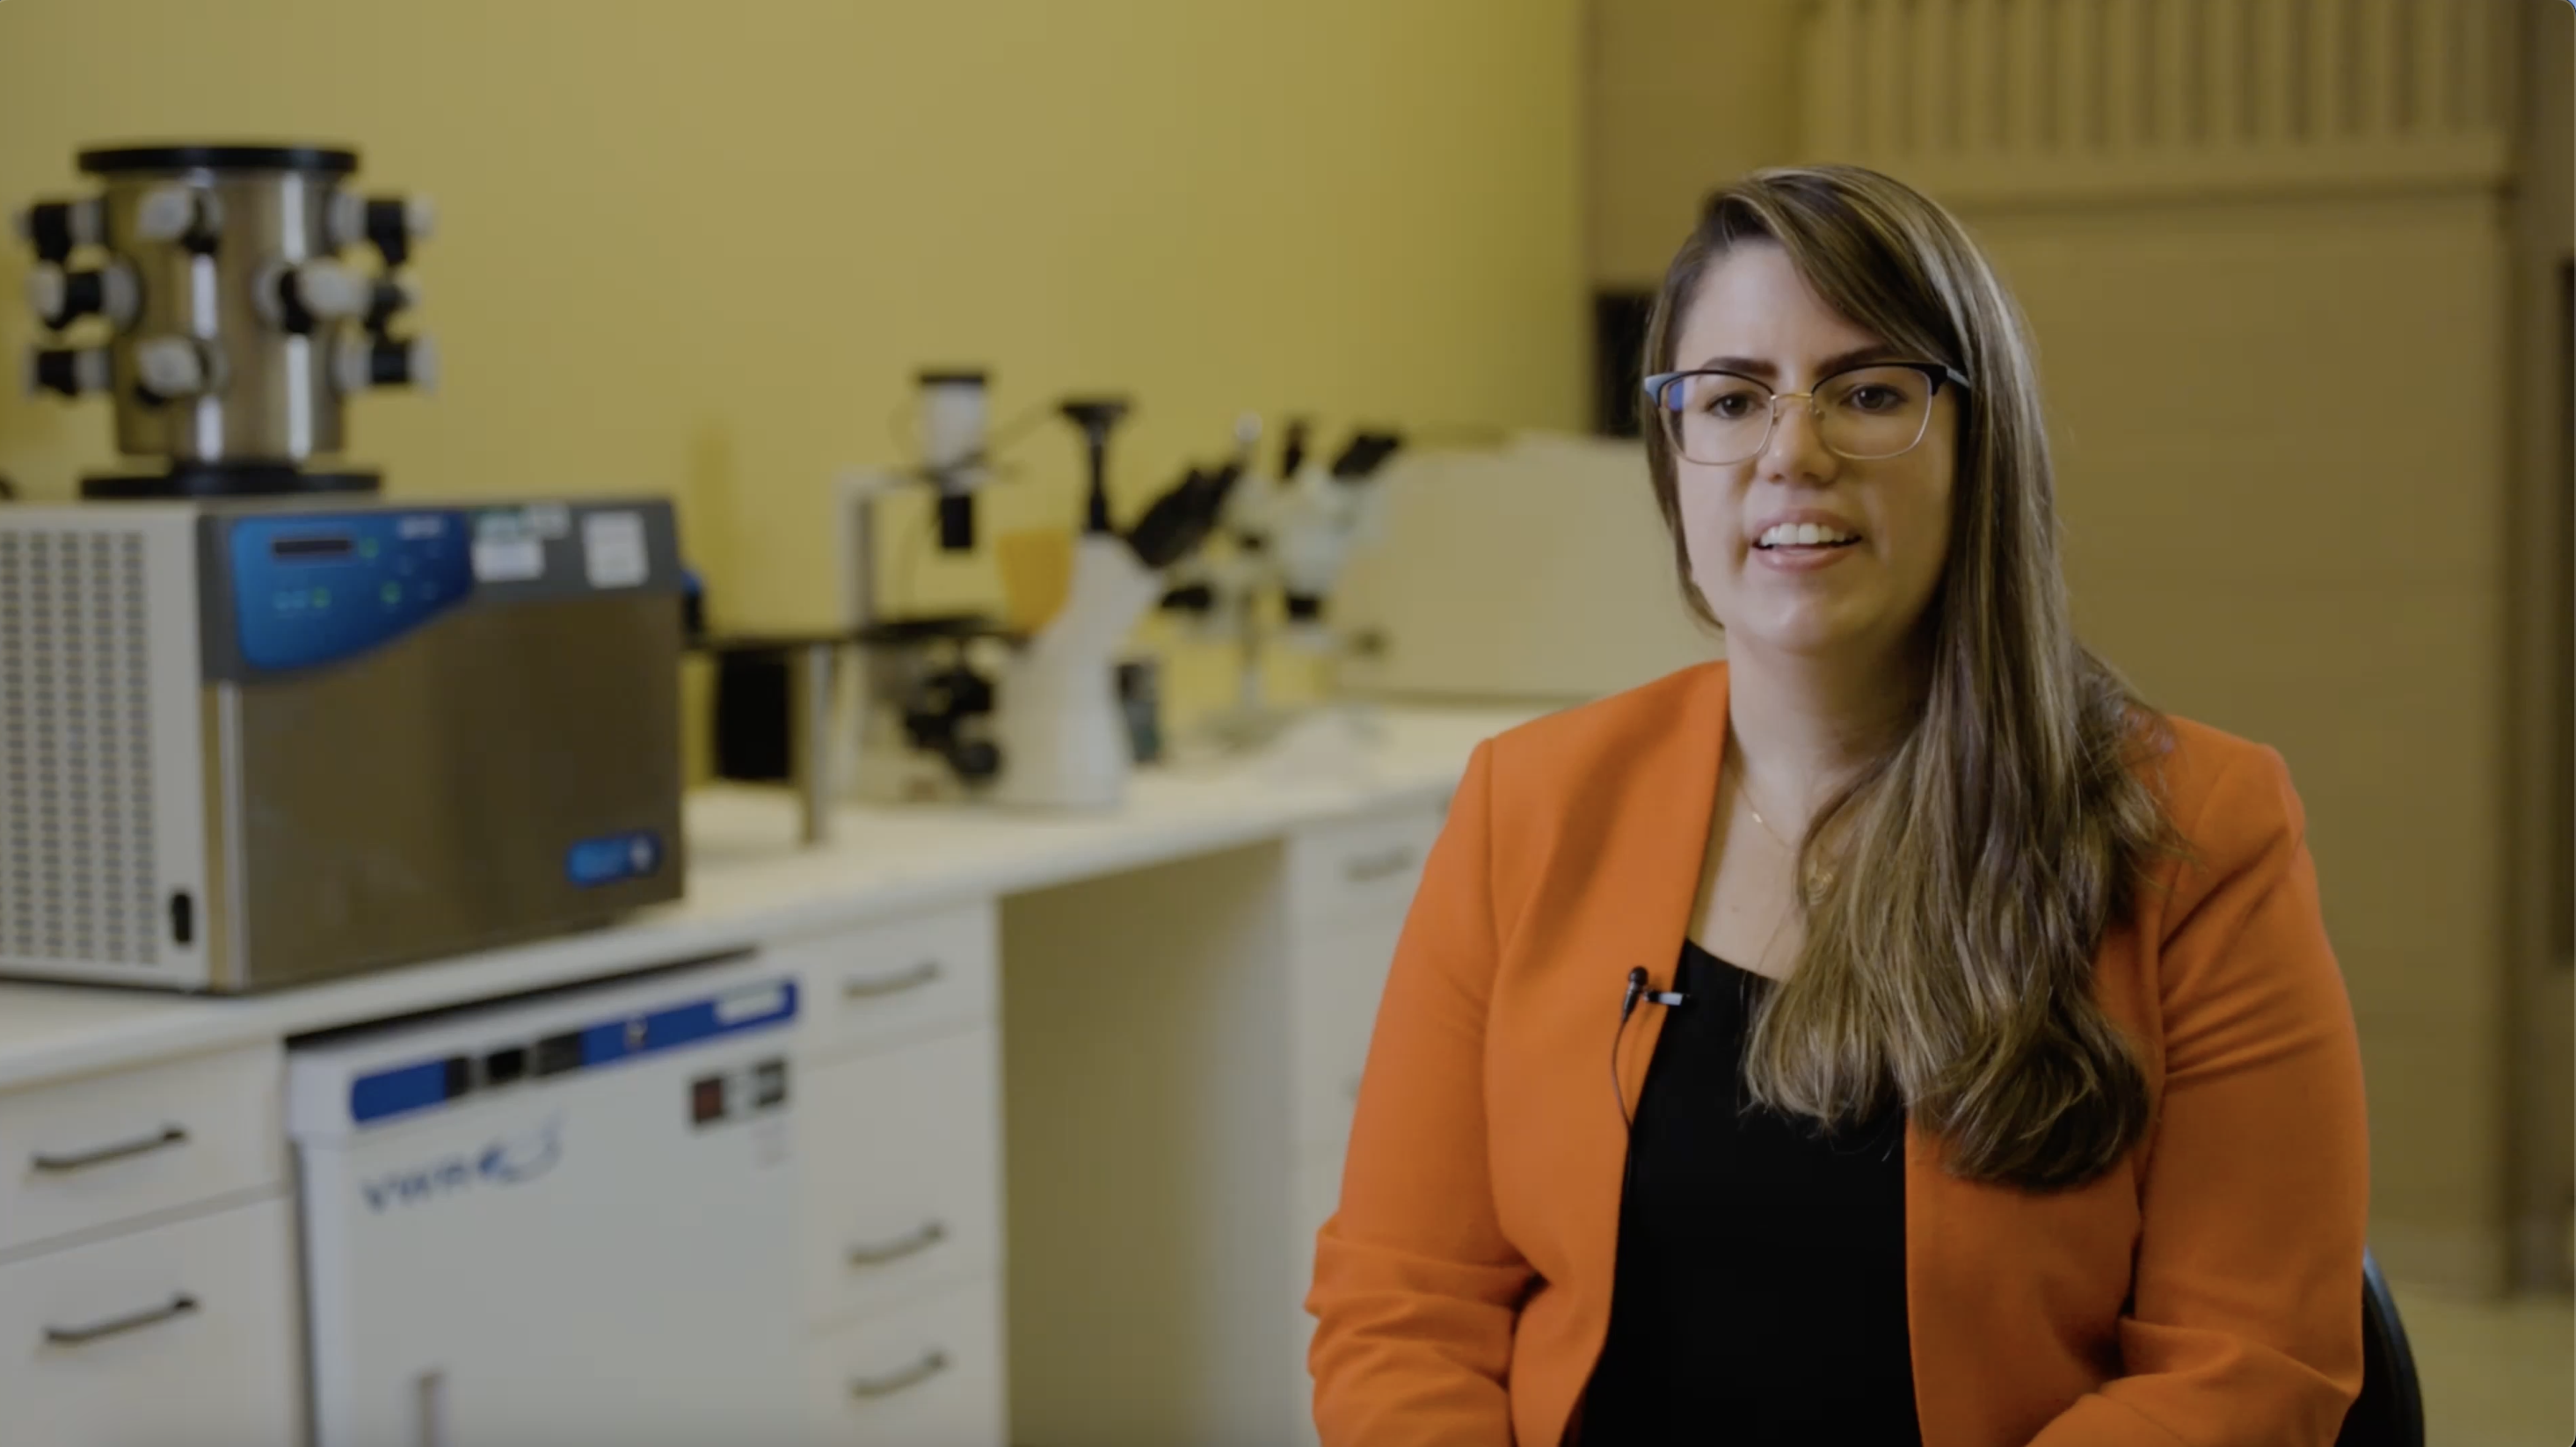 Dr. Karolina Valente of VoxCell BioInnovation, wearing an orange jacket and sitting in a laboratory